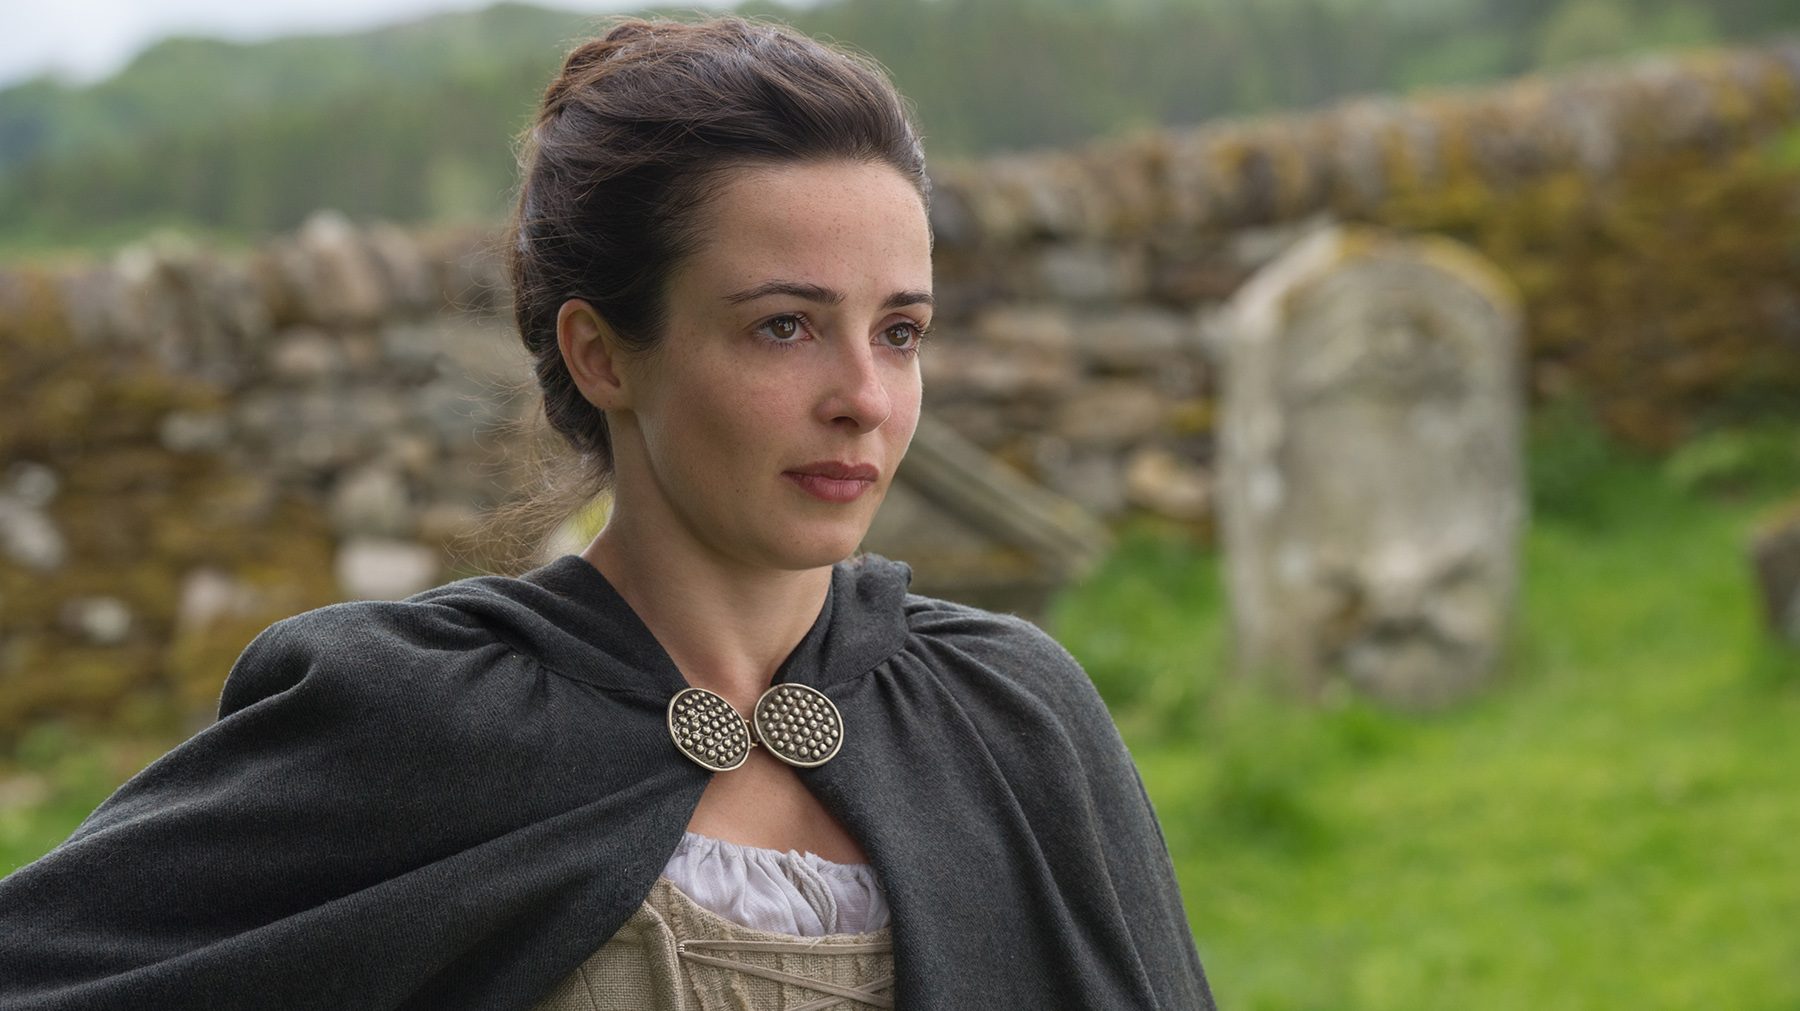 Laura Donnelly Set To Portray Vampire By Night For Marvel Halloween Special on Disney+